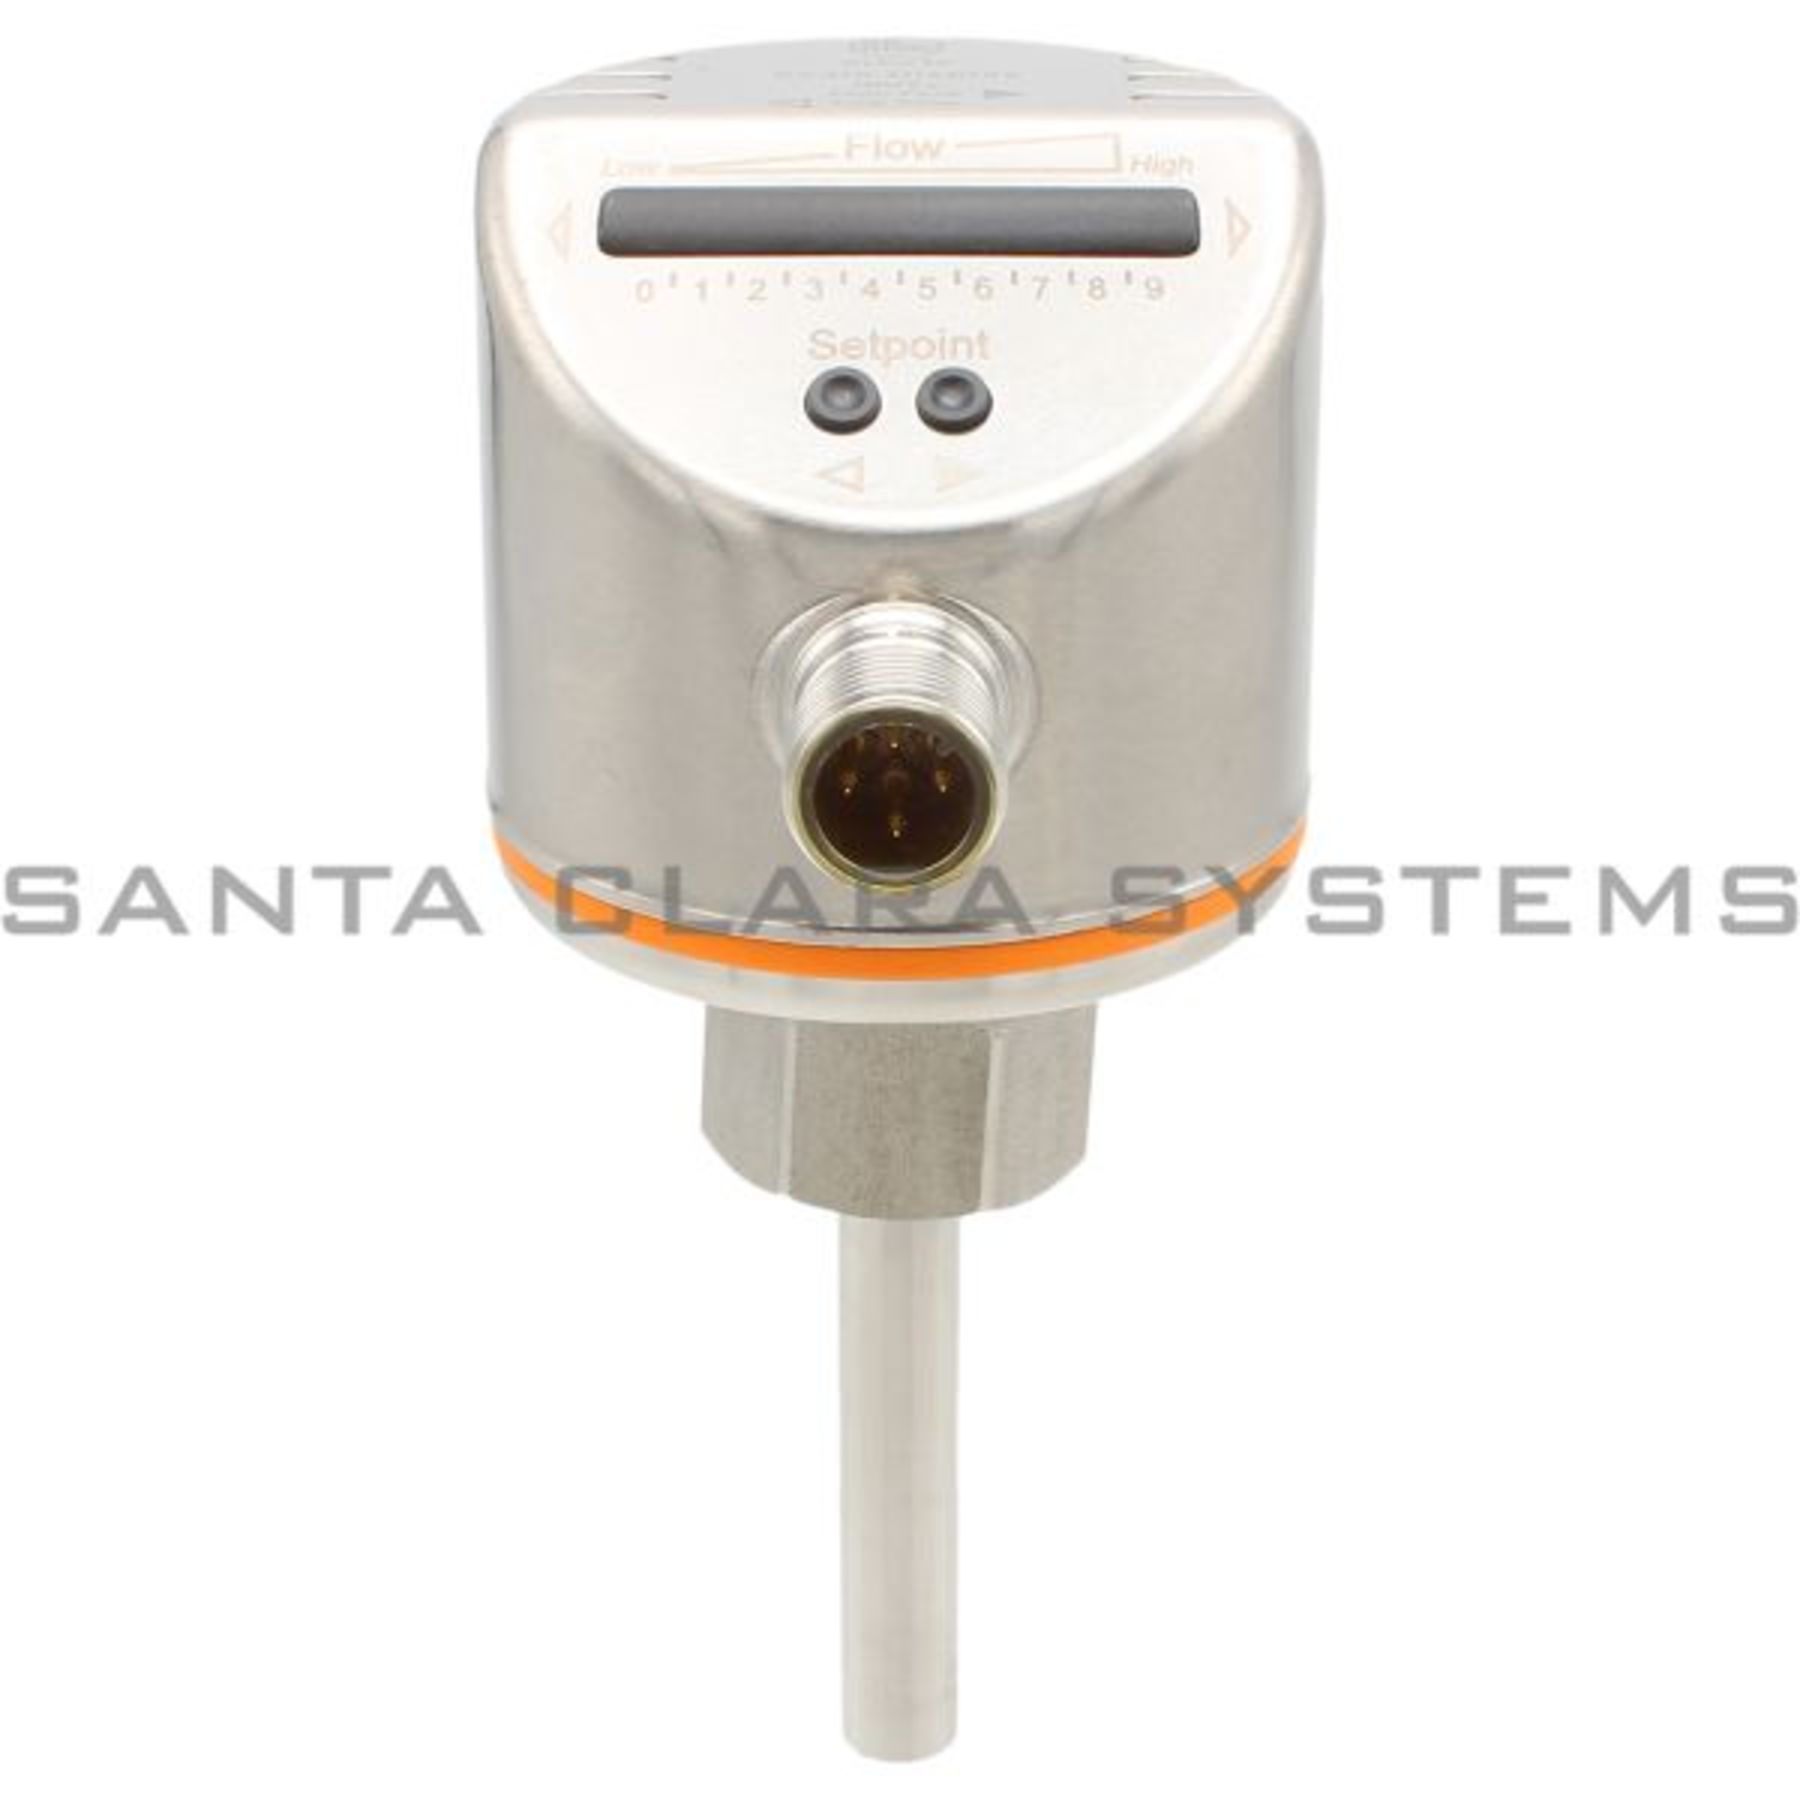 SI5010 Efector In stock and ready to ship - Santa Clara Systems